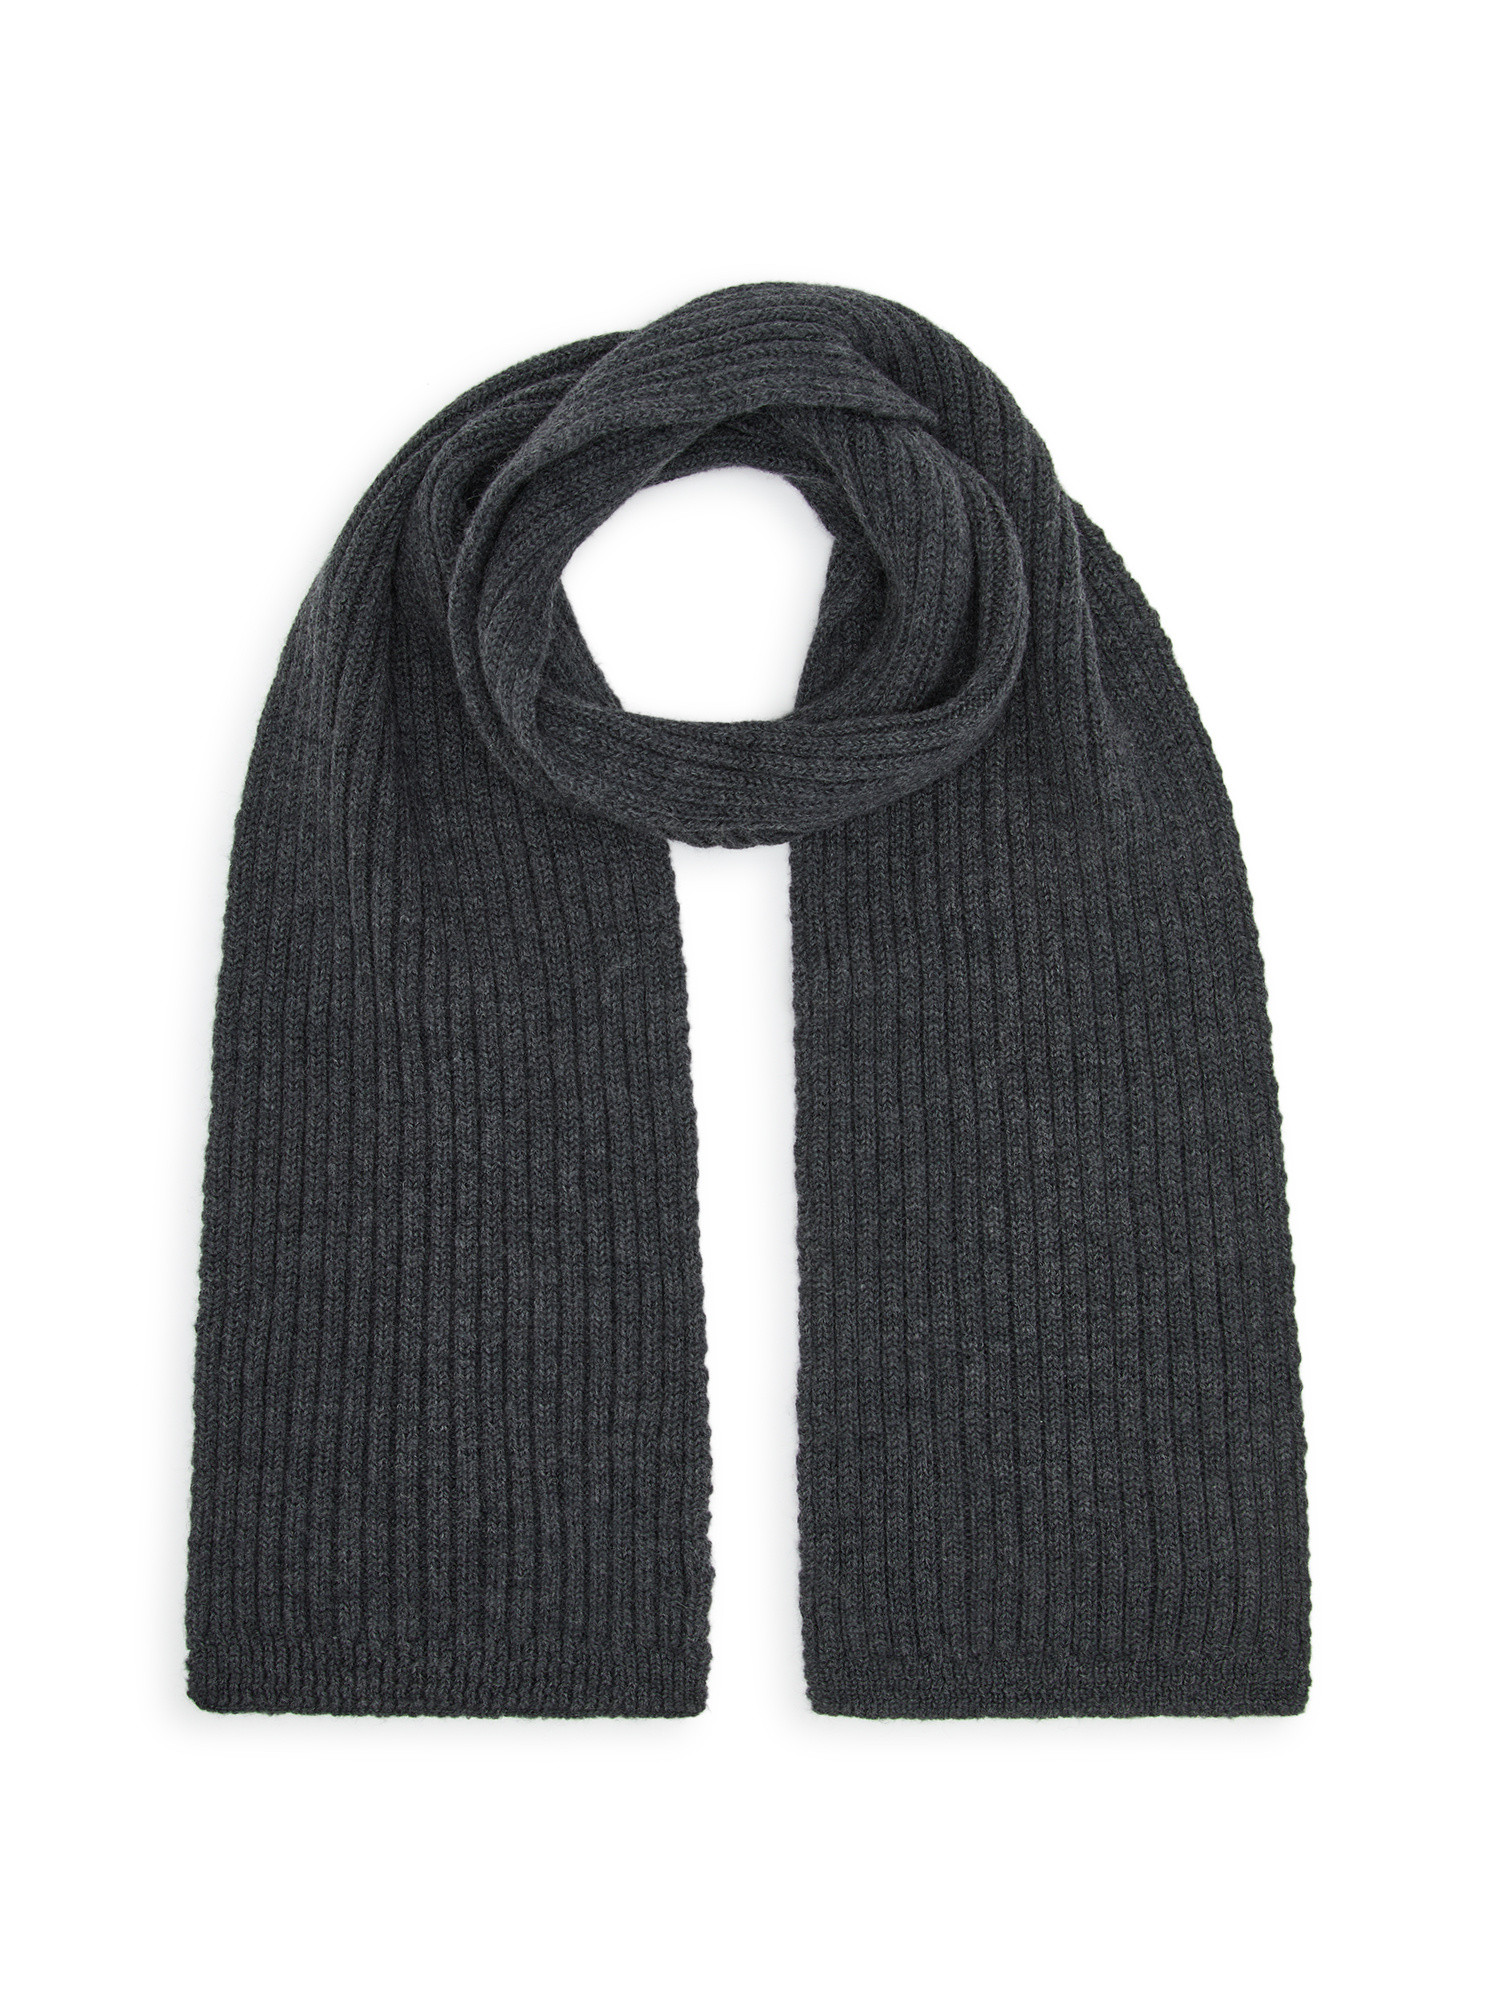 Luca D'Altieri - Ribbed scarf in pure wool, Grey, large image number 0